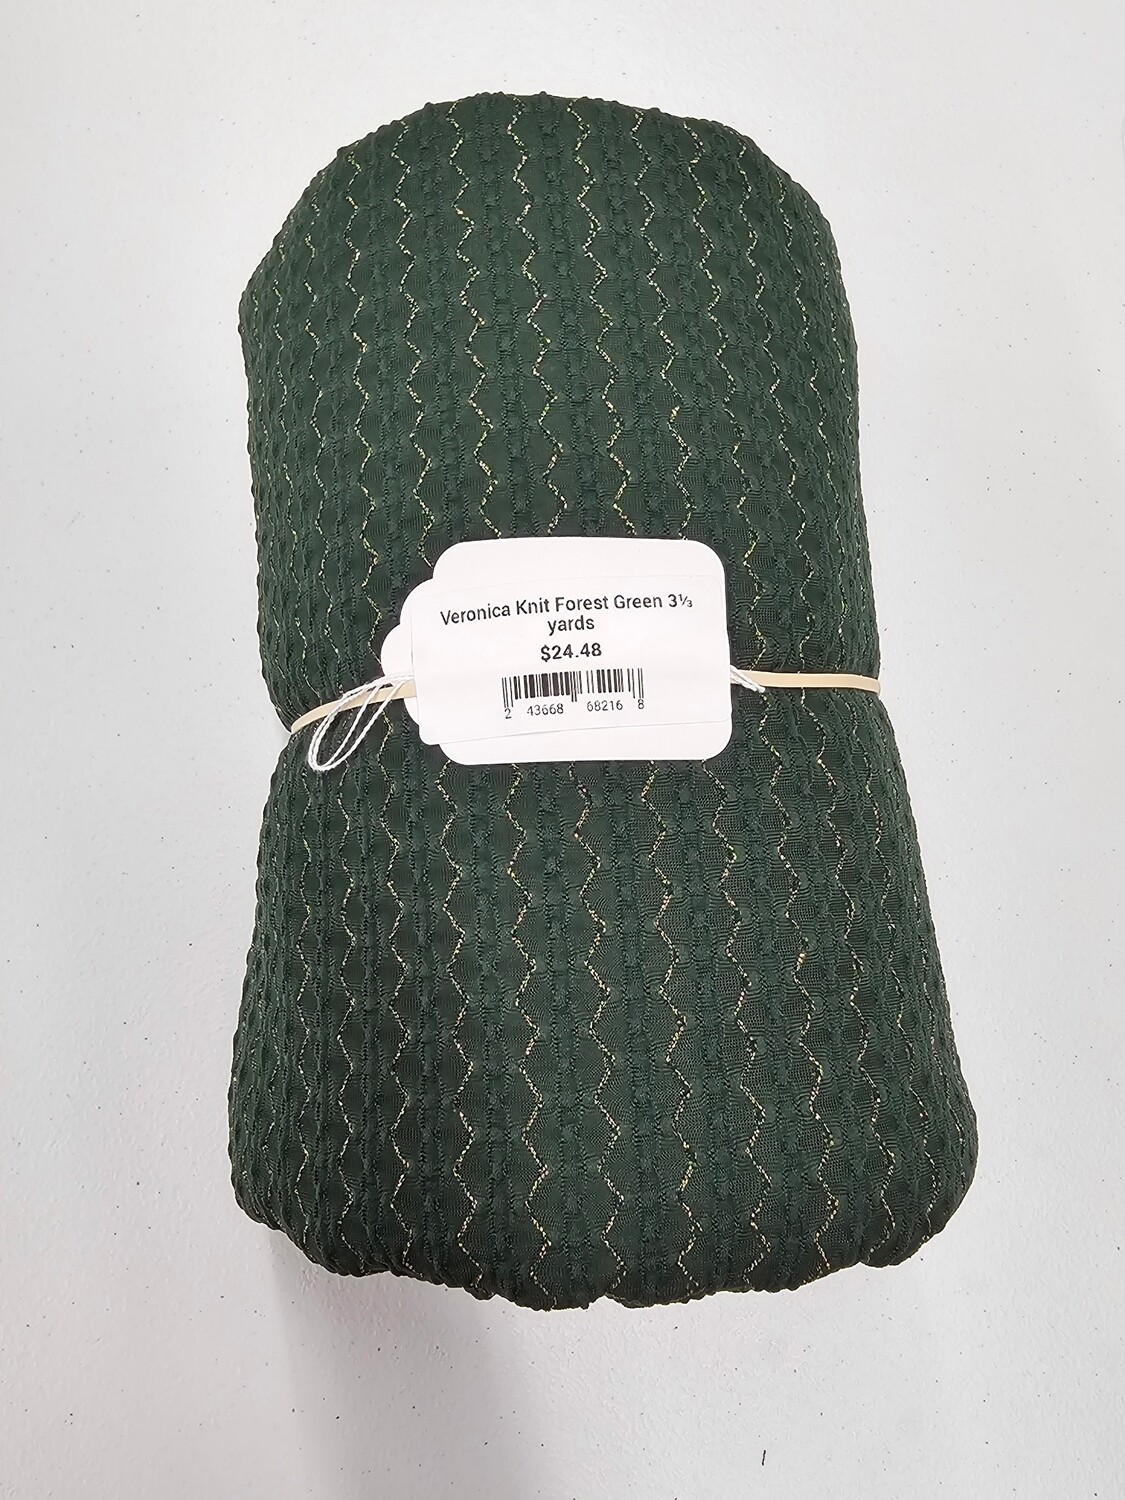 Veronica Knit Forest Green 3⅓ yards